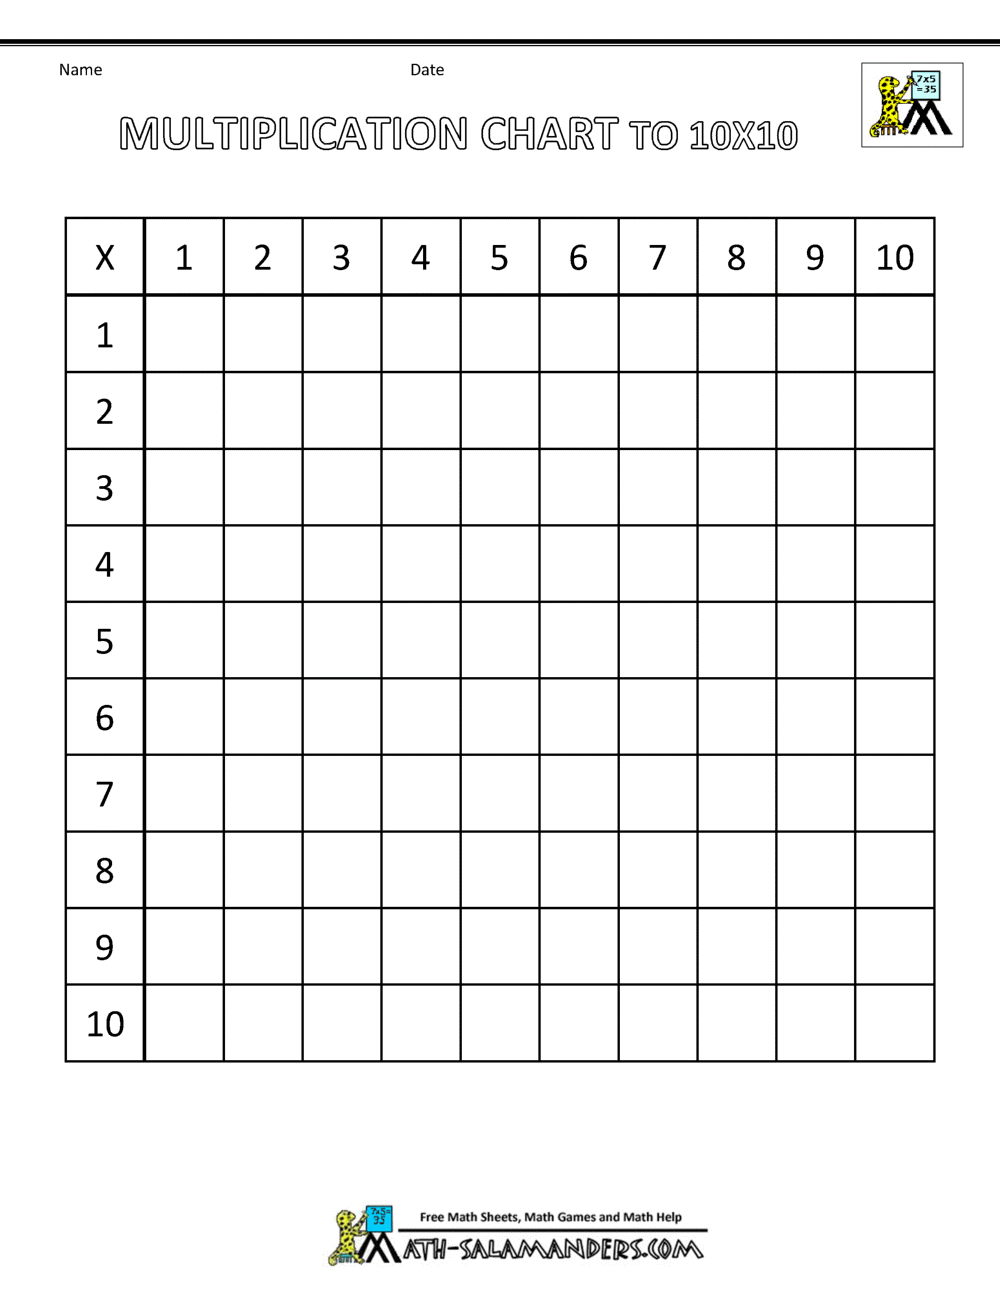 Search Results for “Times Table Grid 10 X 10” – Calendar 2015